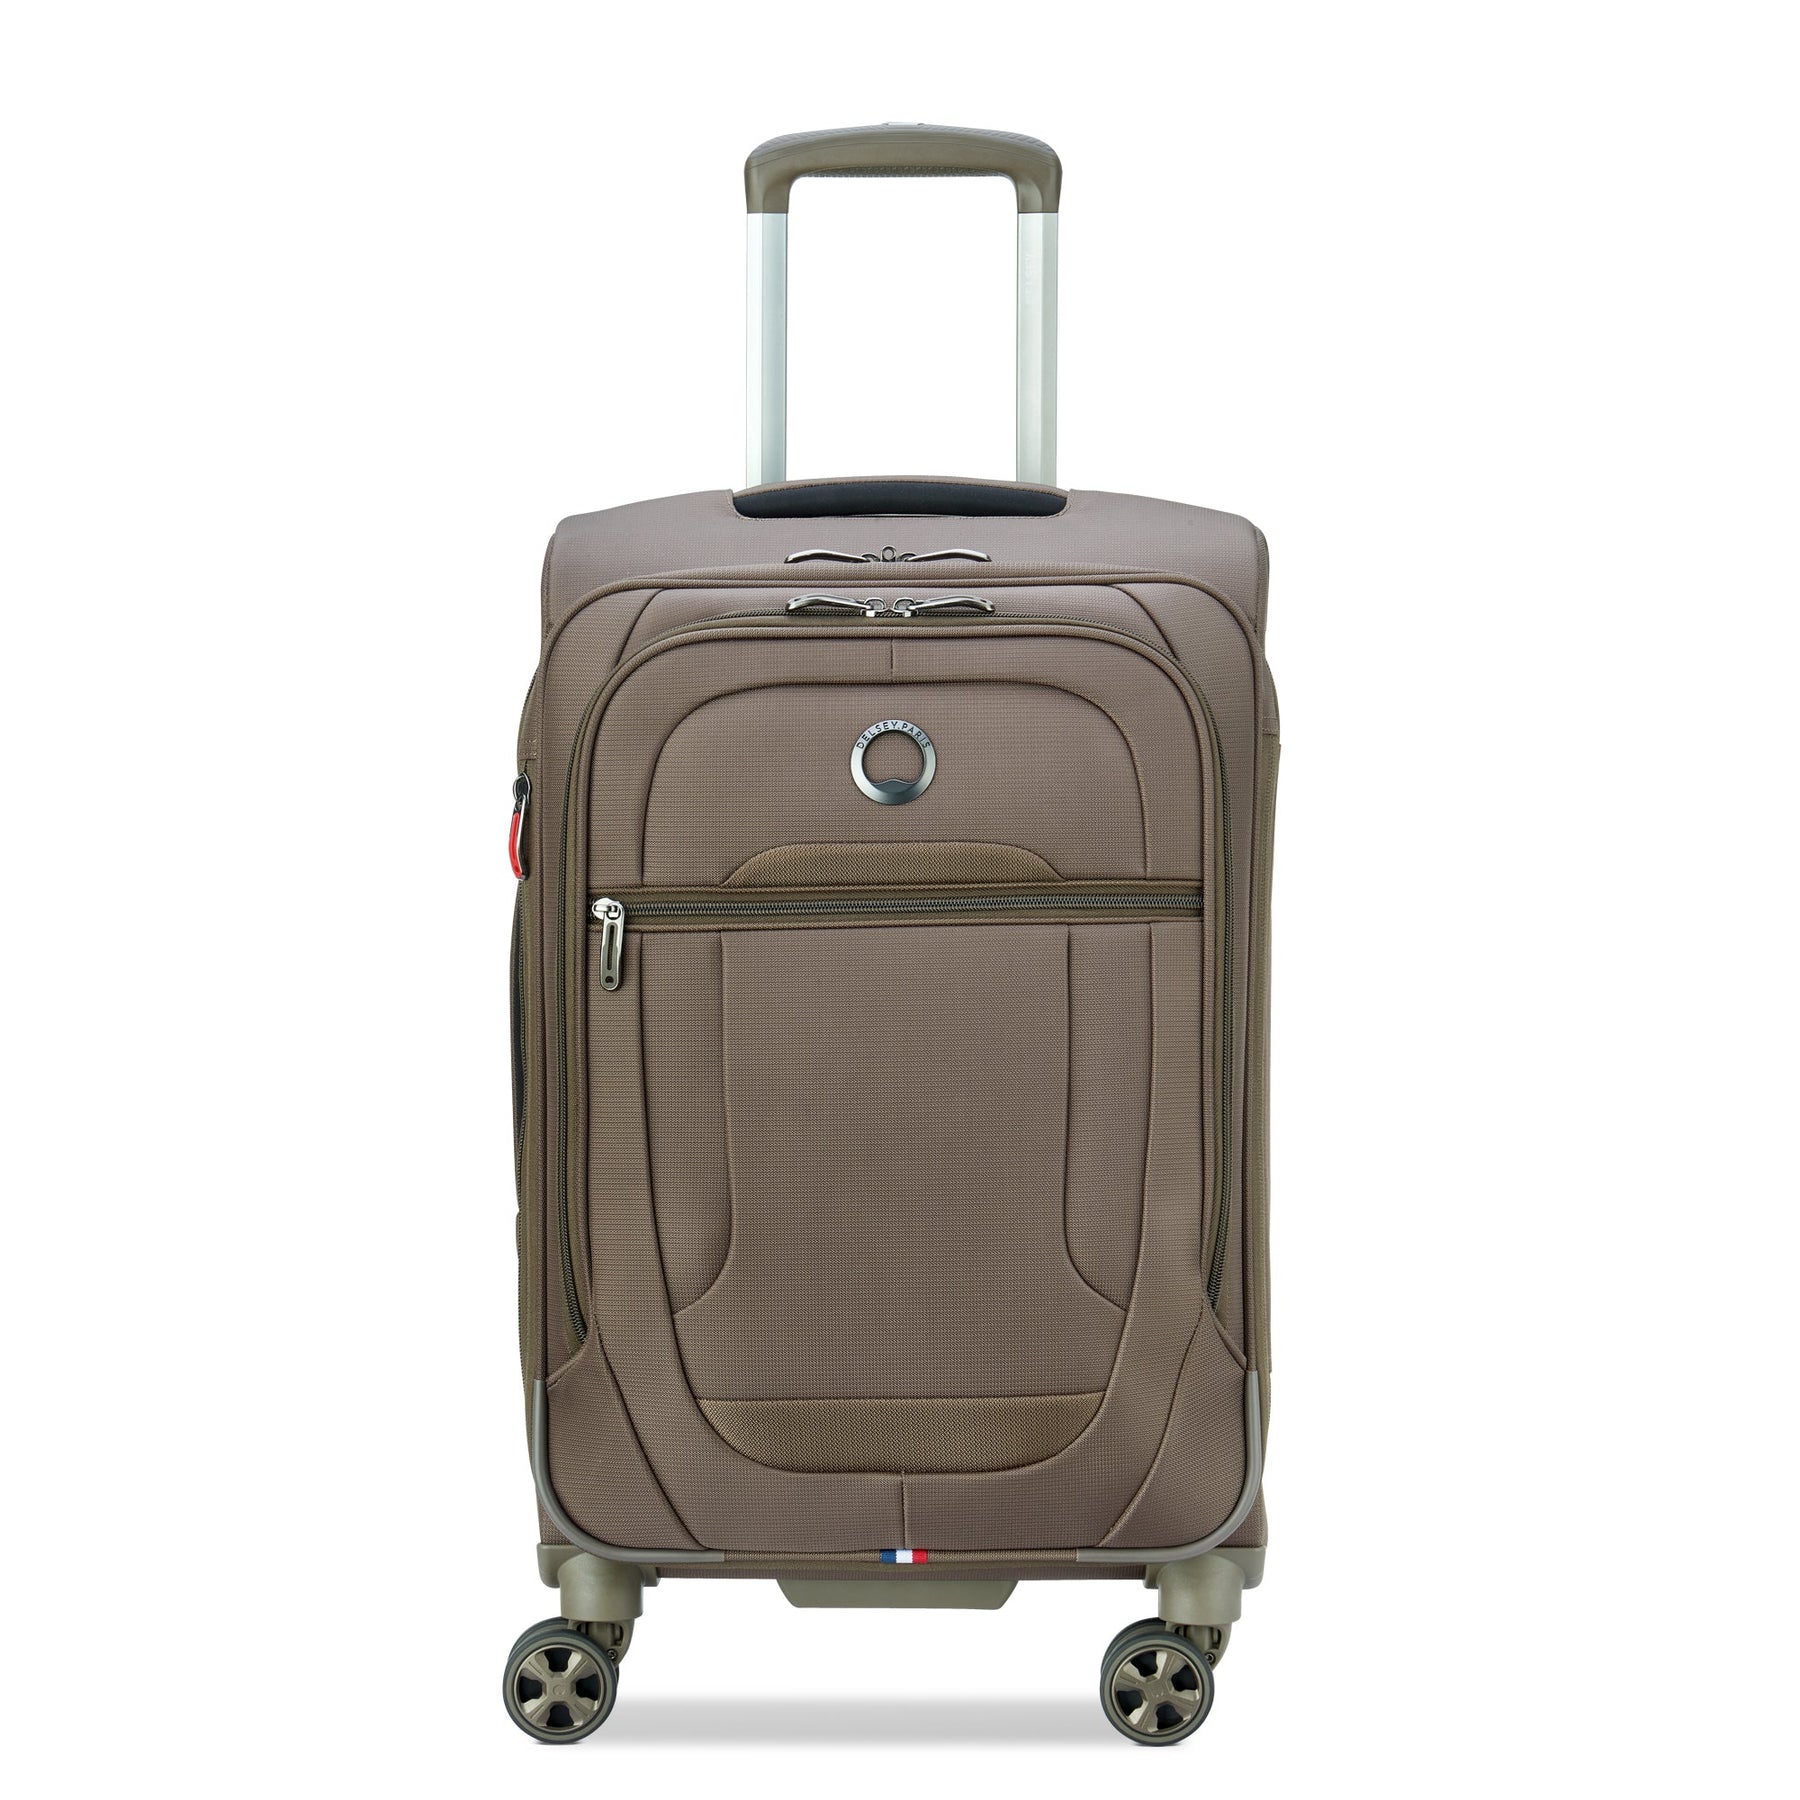 HELIUM DLX CARRY-ON - 21" SMALL